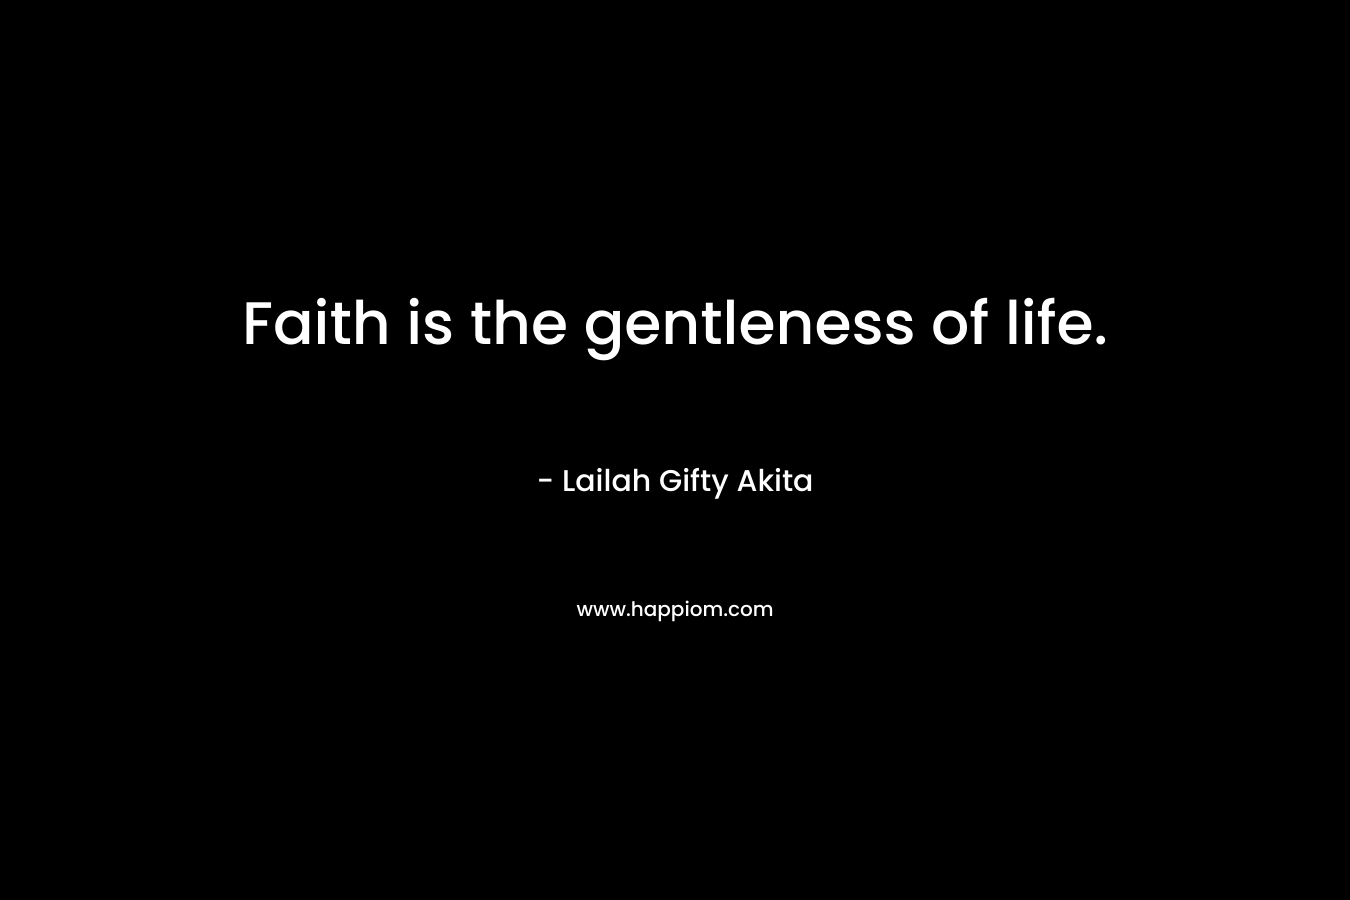 Faith is the gentleness of life. – Lailah Gifty Akita